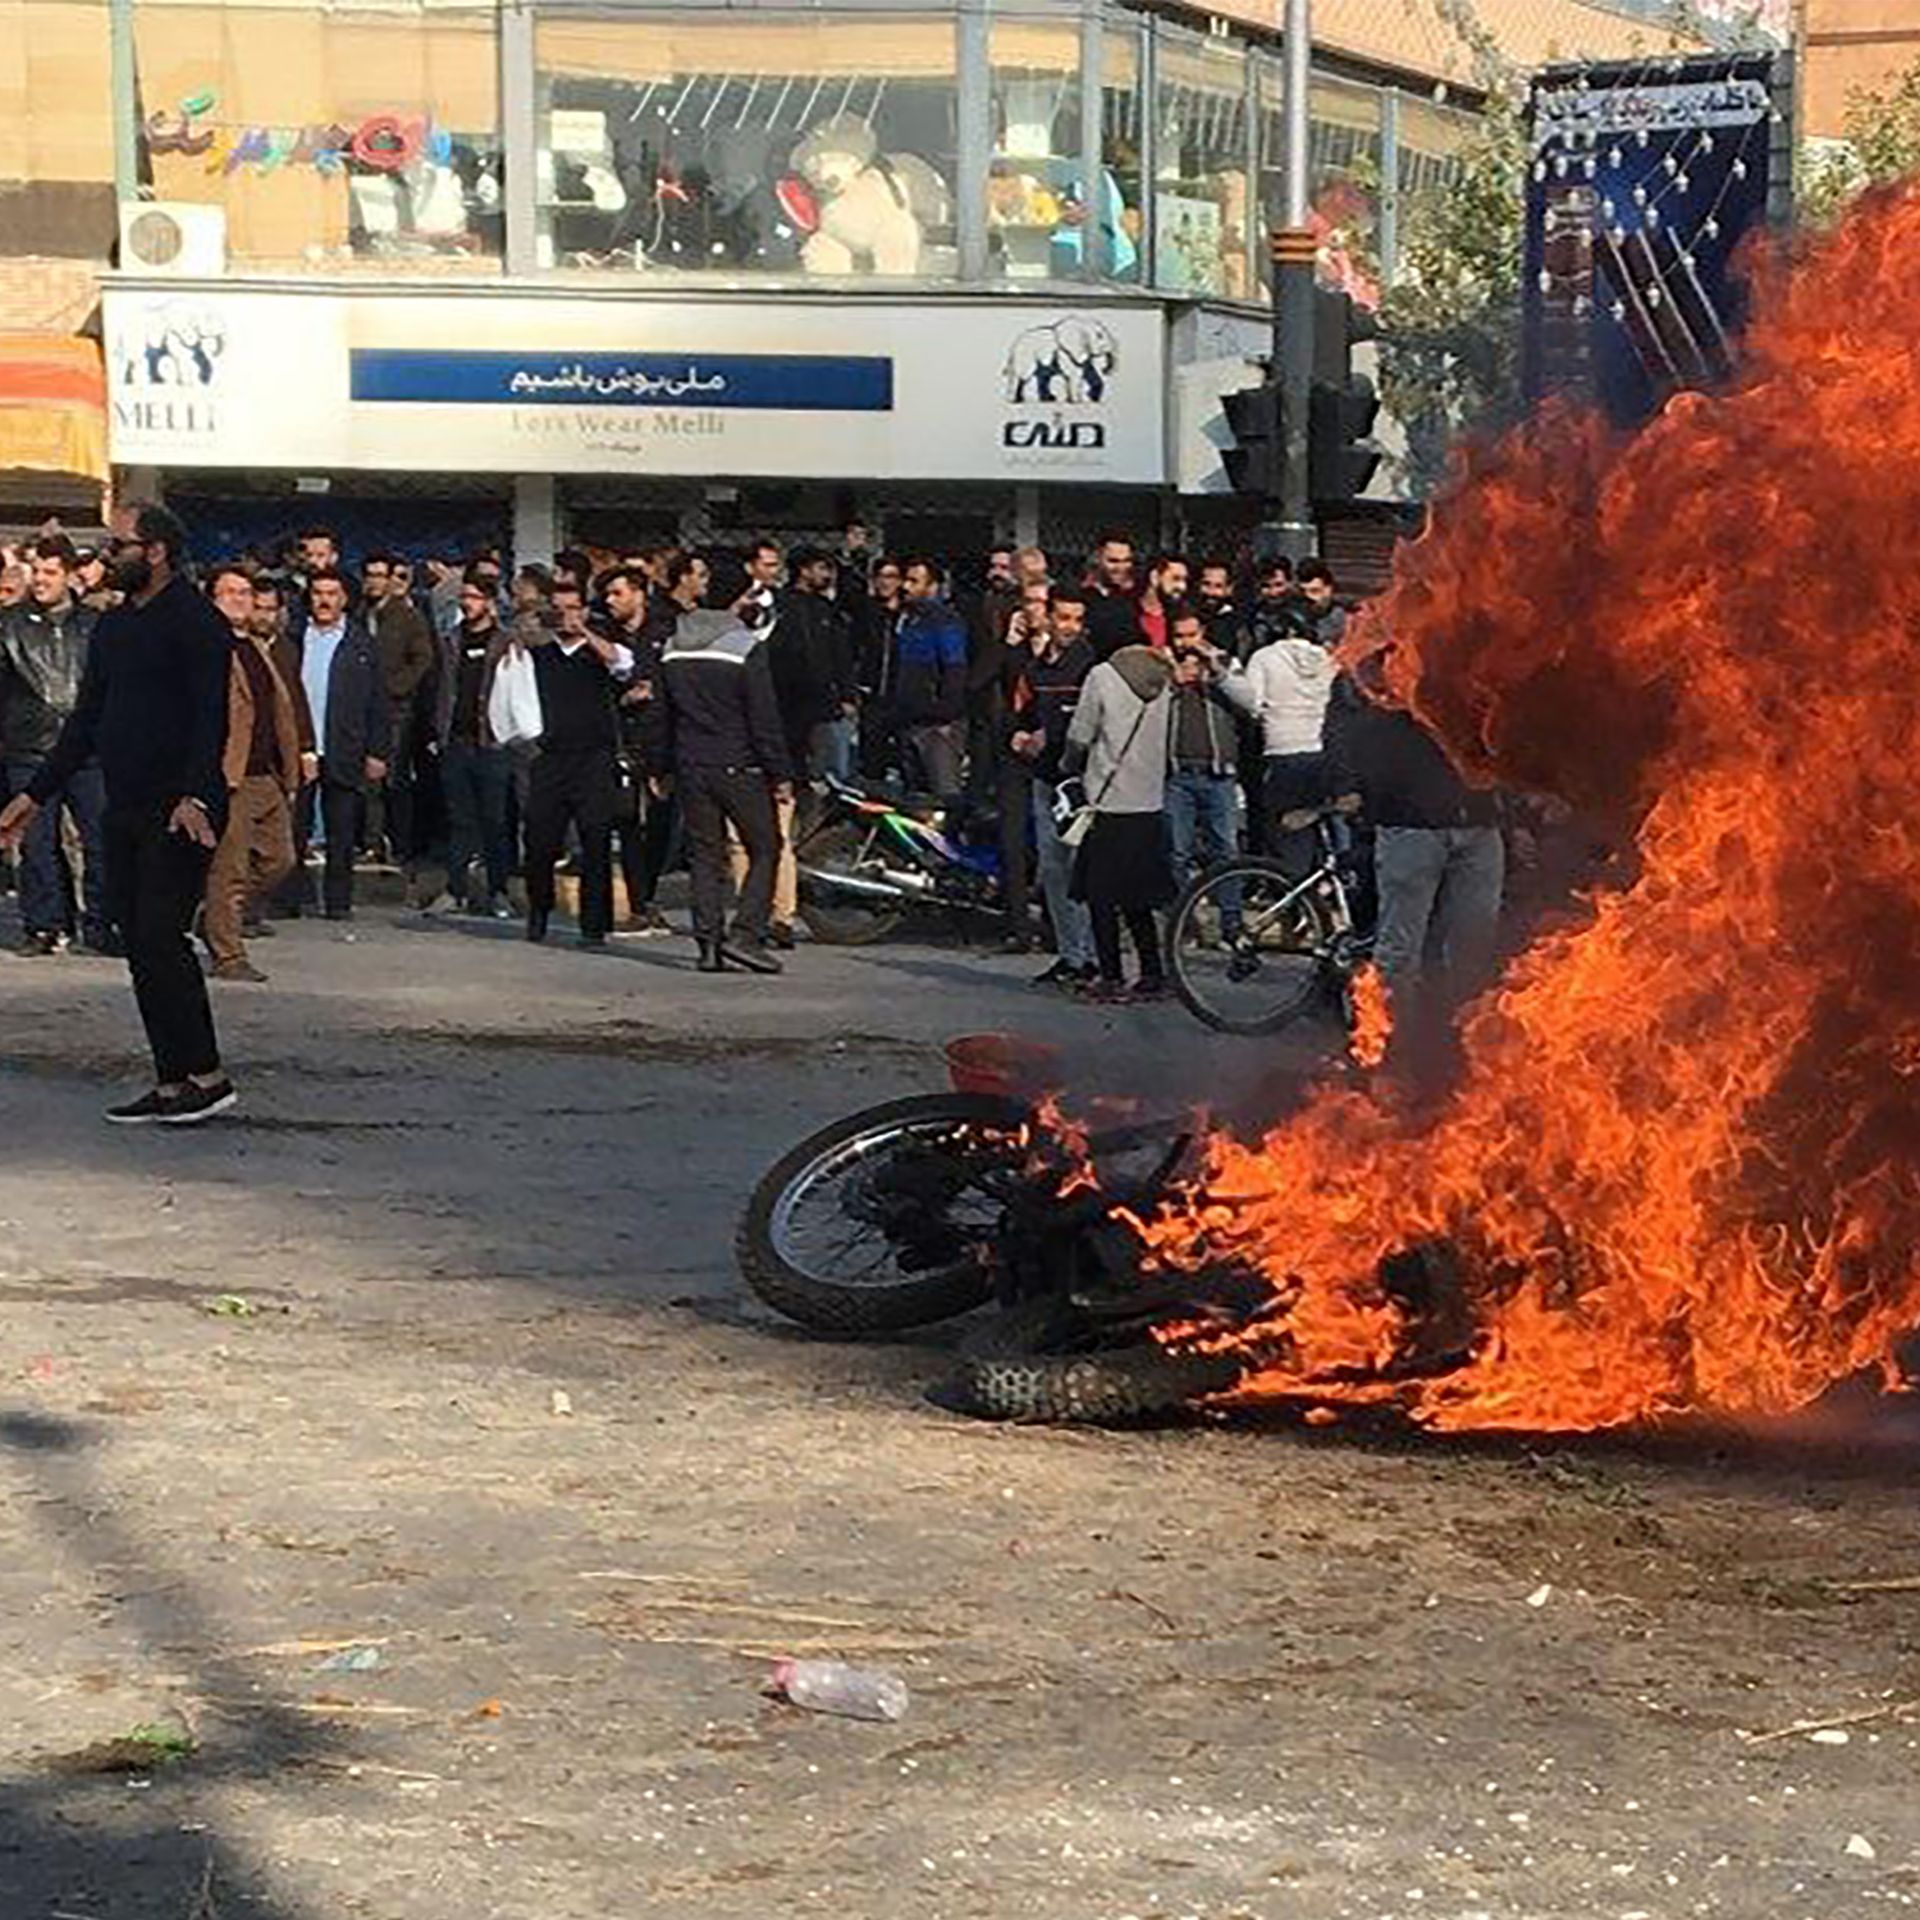 protestors surround a burning motorcycle in a street intersection